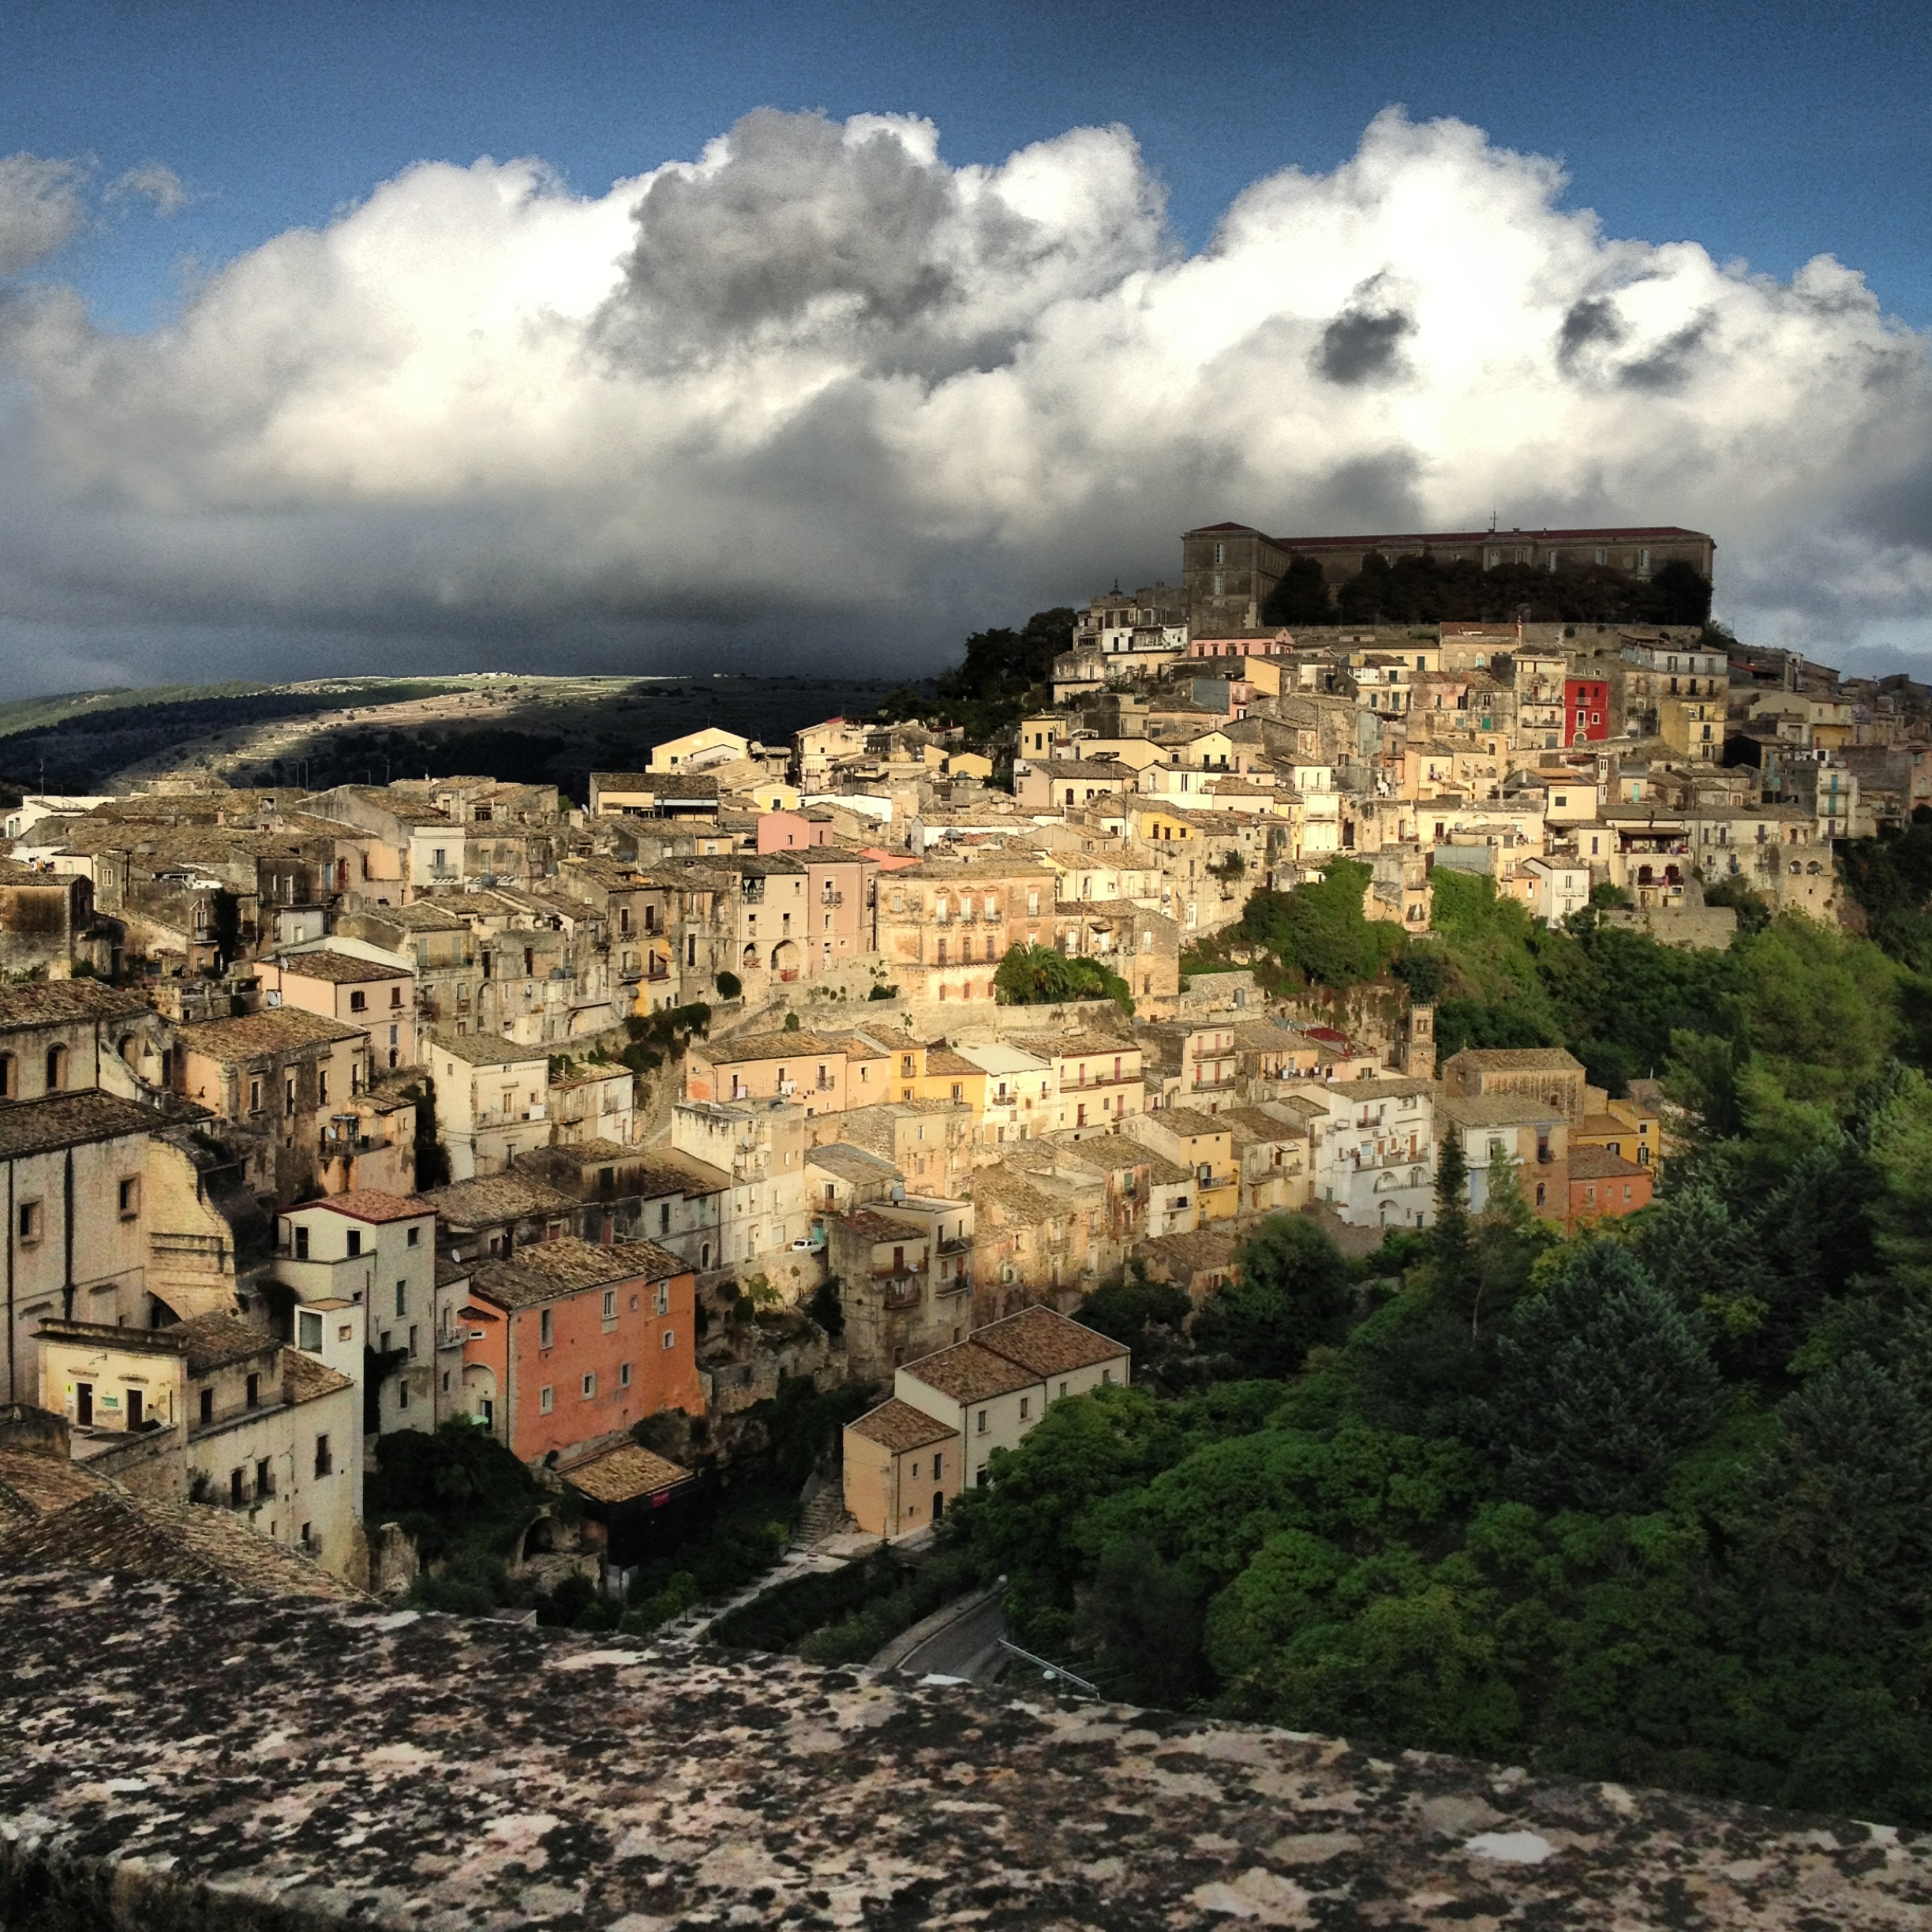 The old town of Ragusa Ibla, Sicily